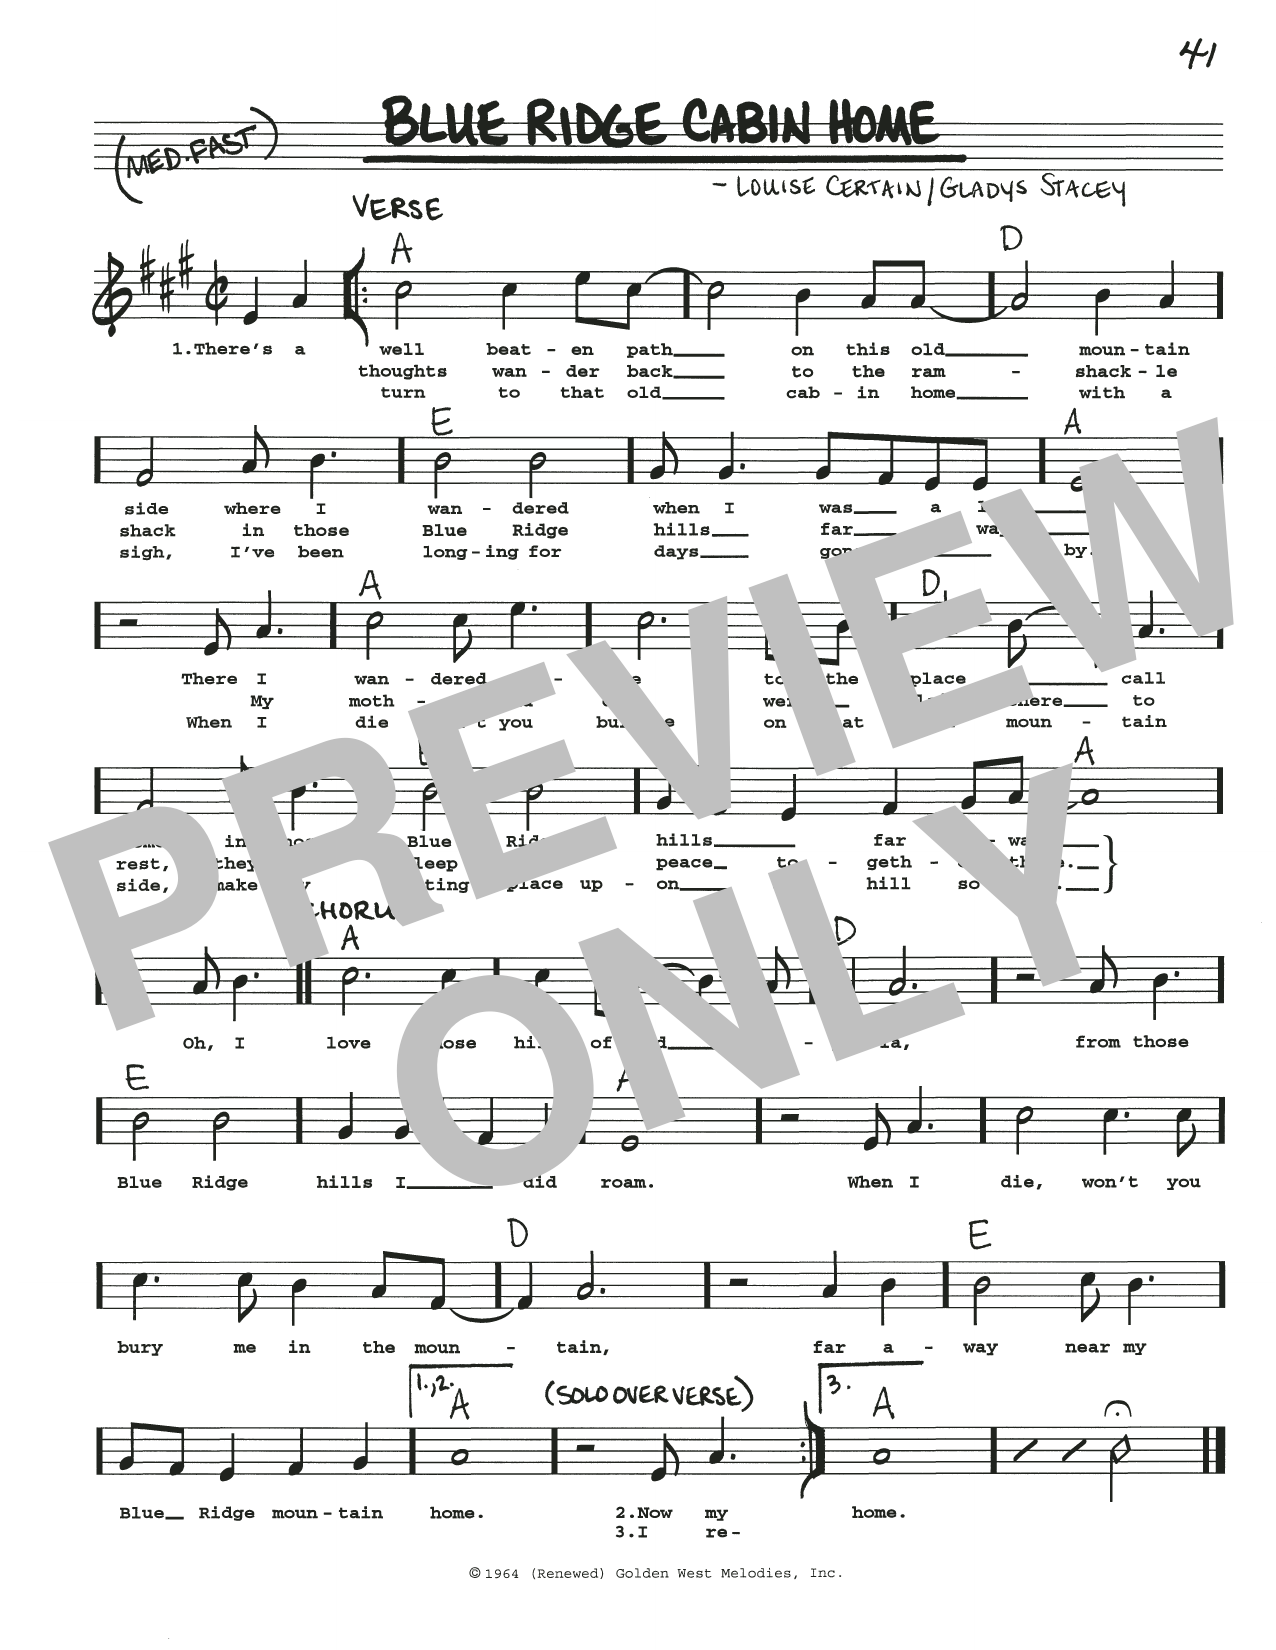 Download Gladys Stacey Blue Ridge Cabin Home Sheet Music